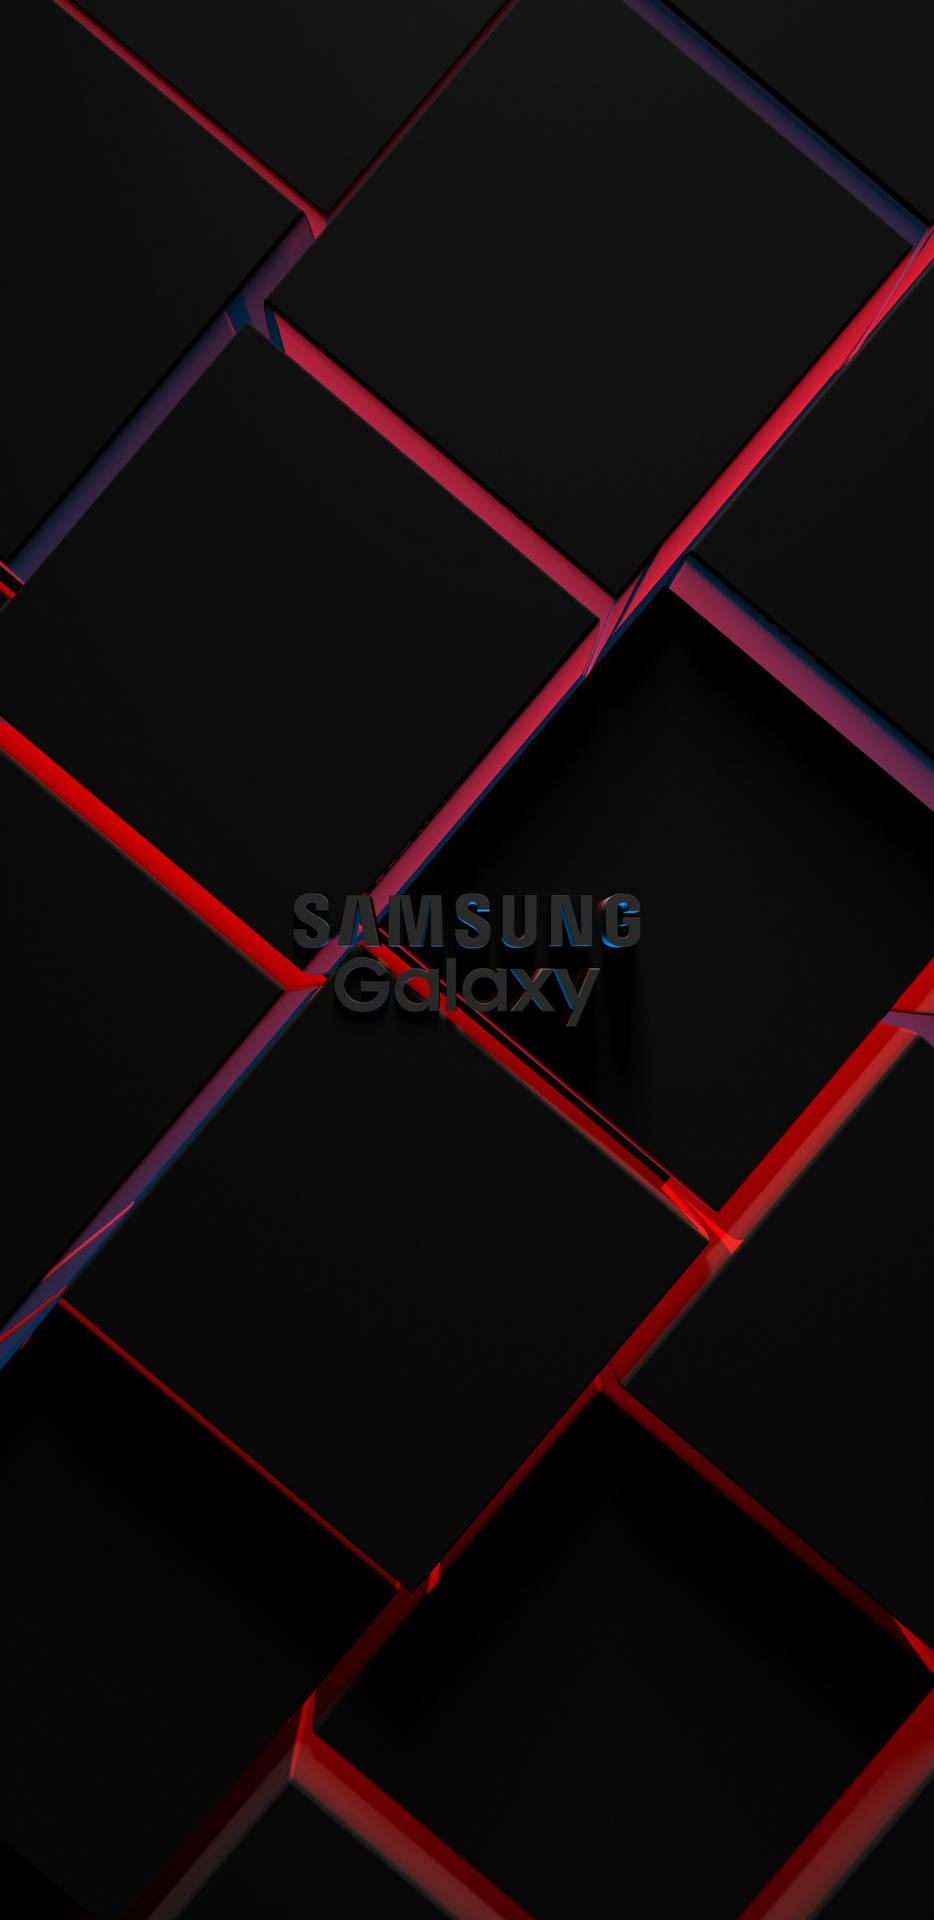 Samsung Galaxy Red And Black